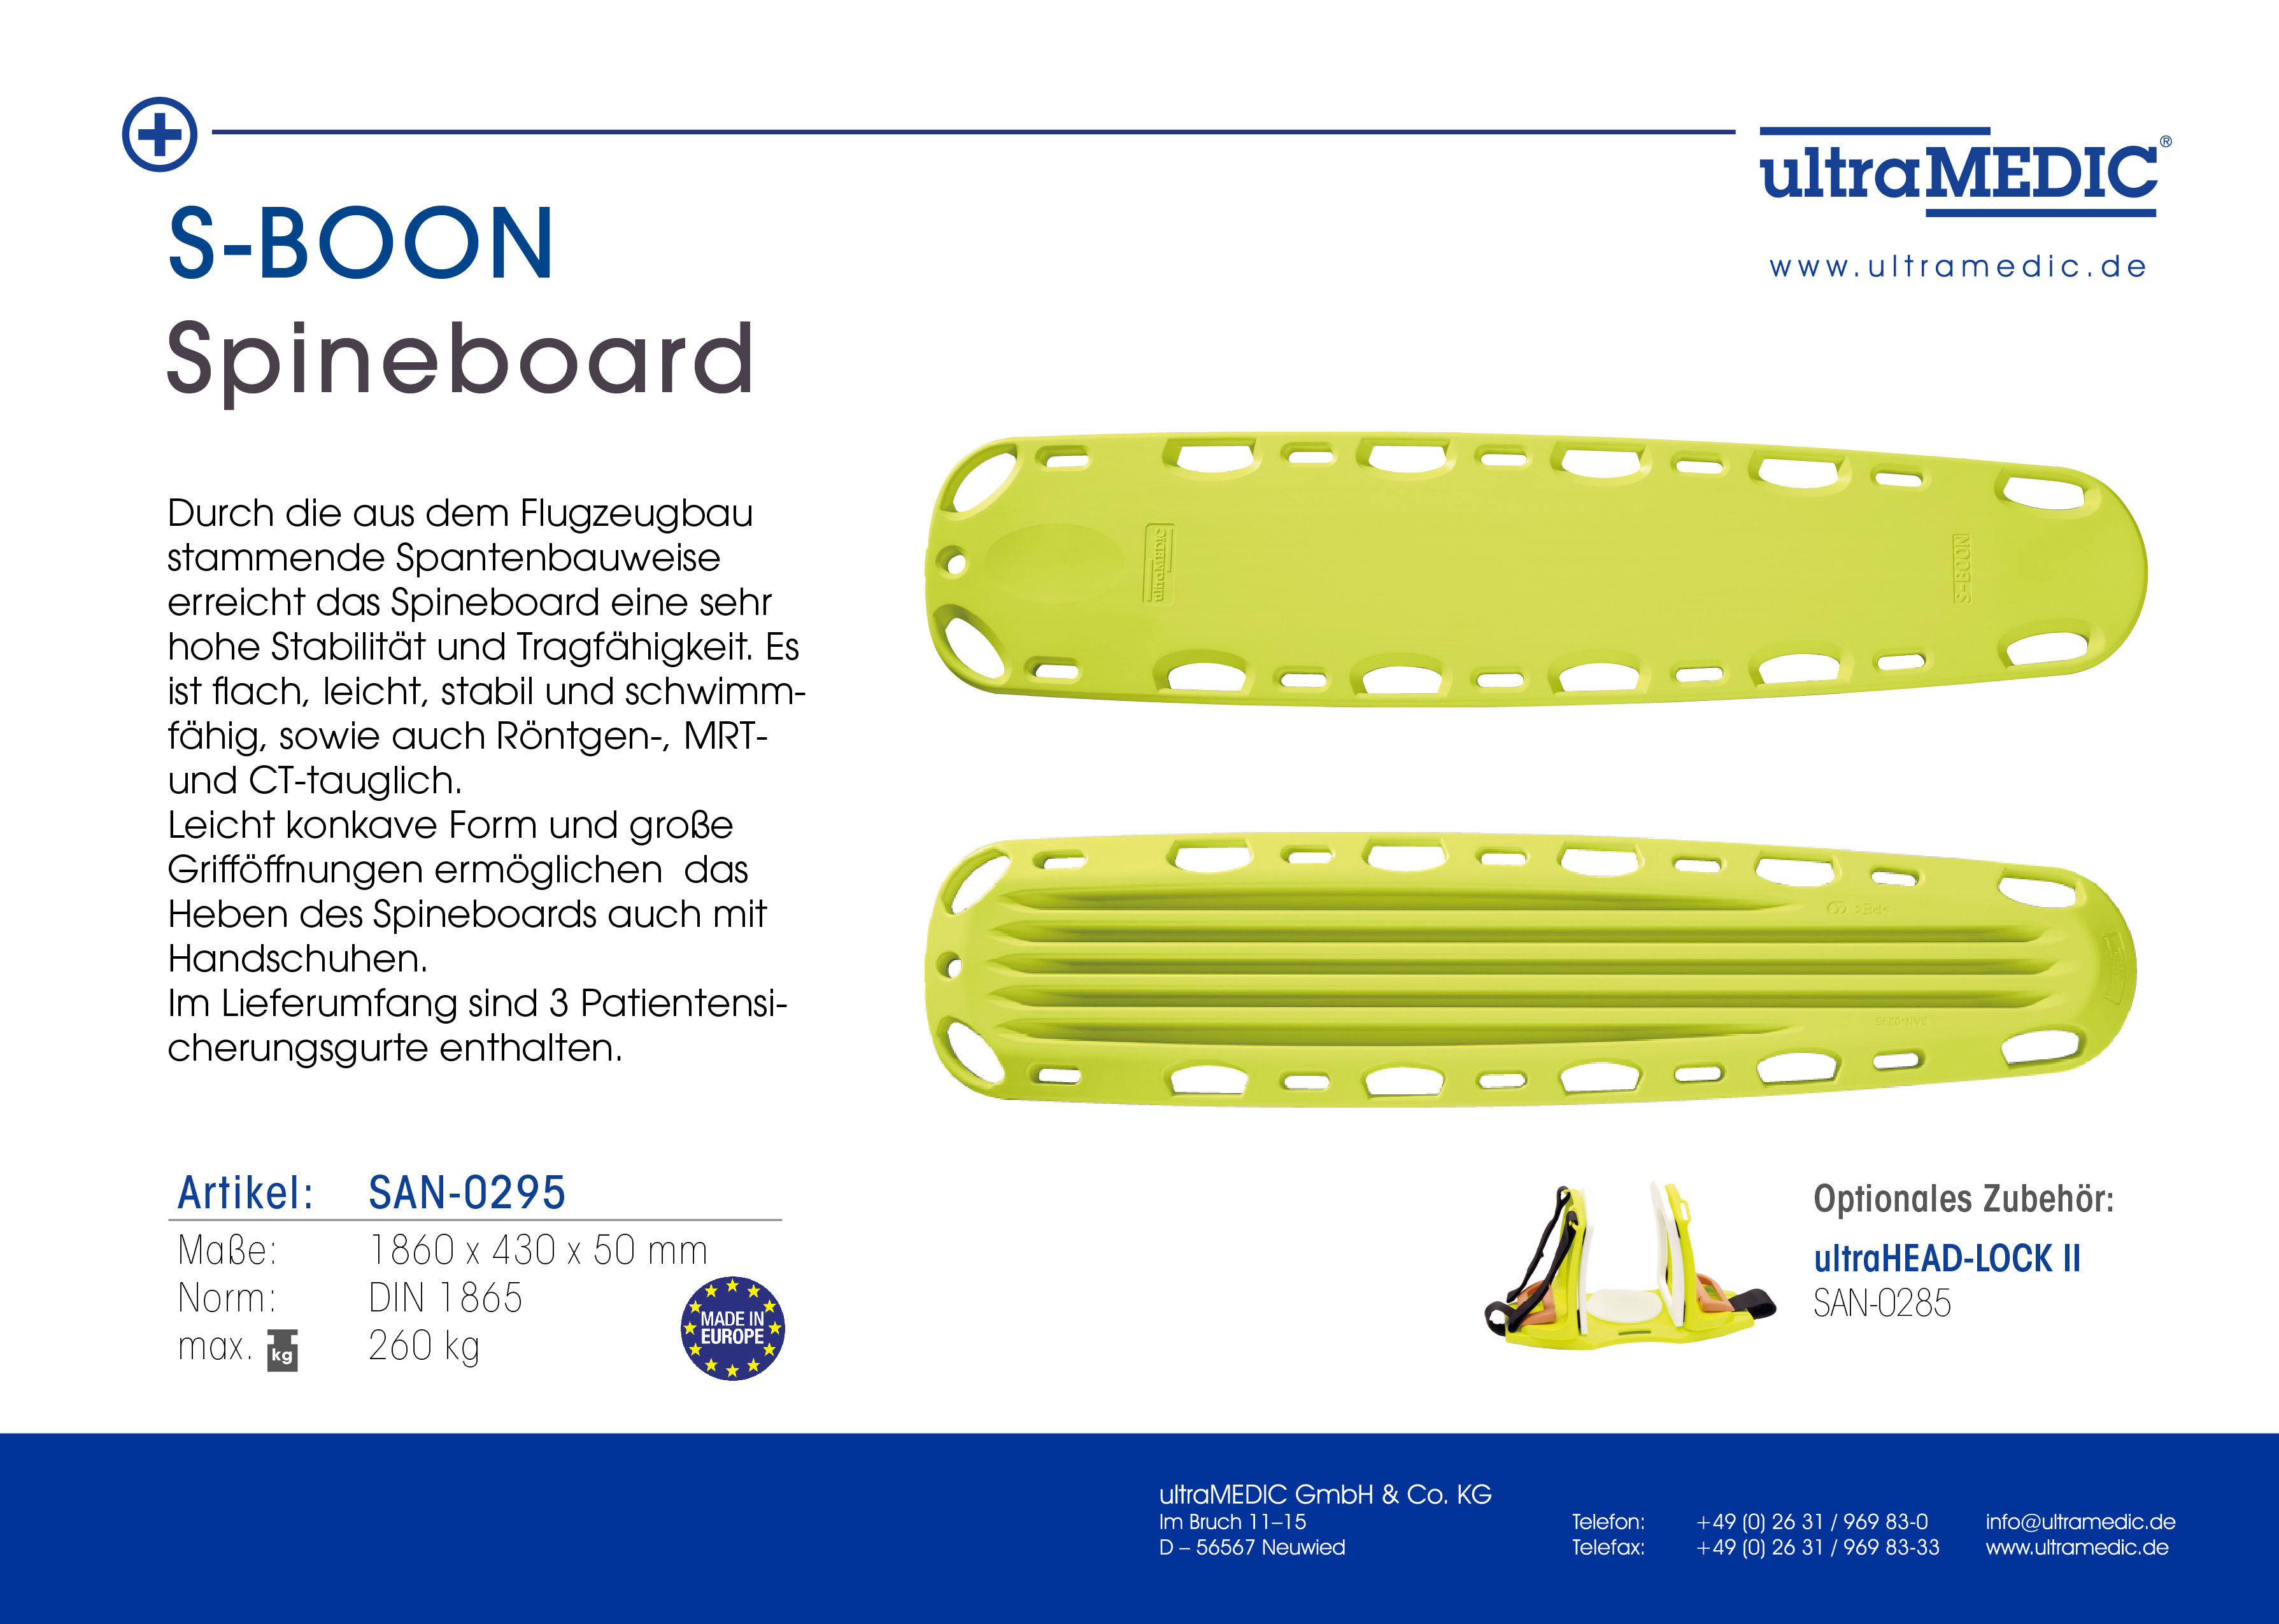 S-BOON Spineboard